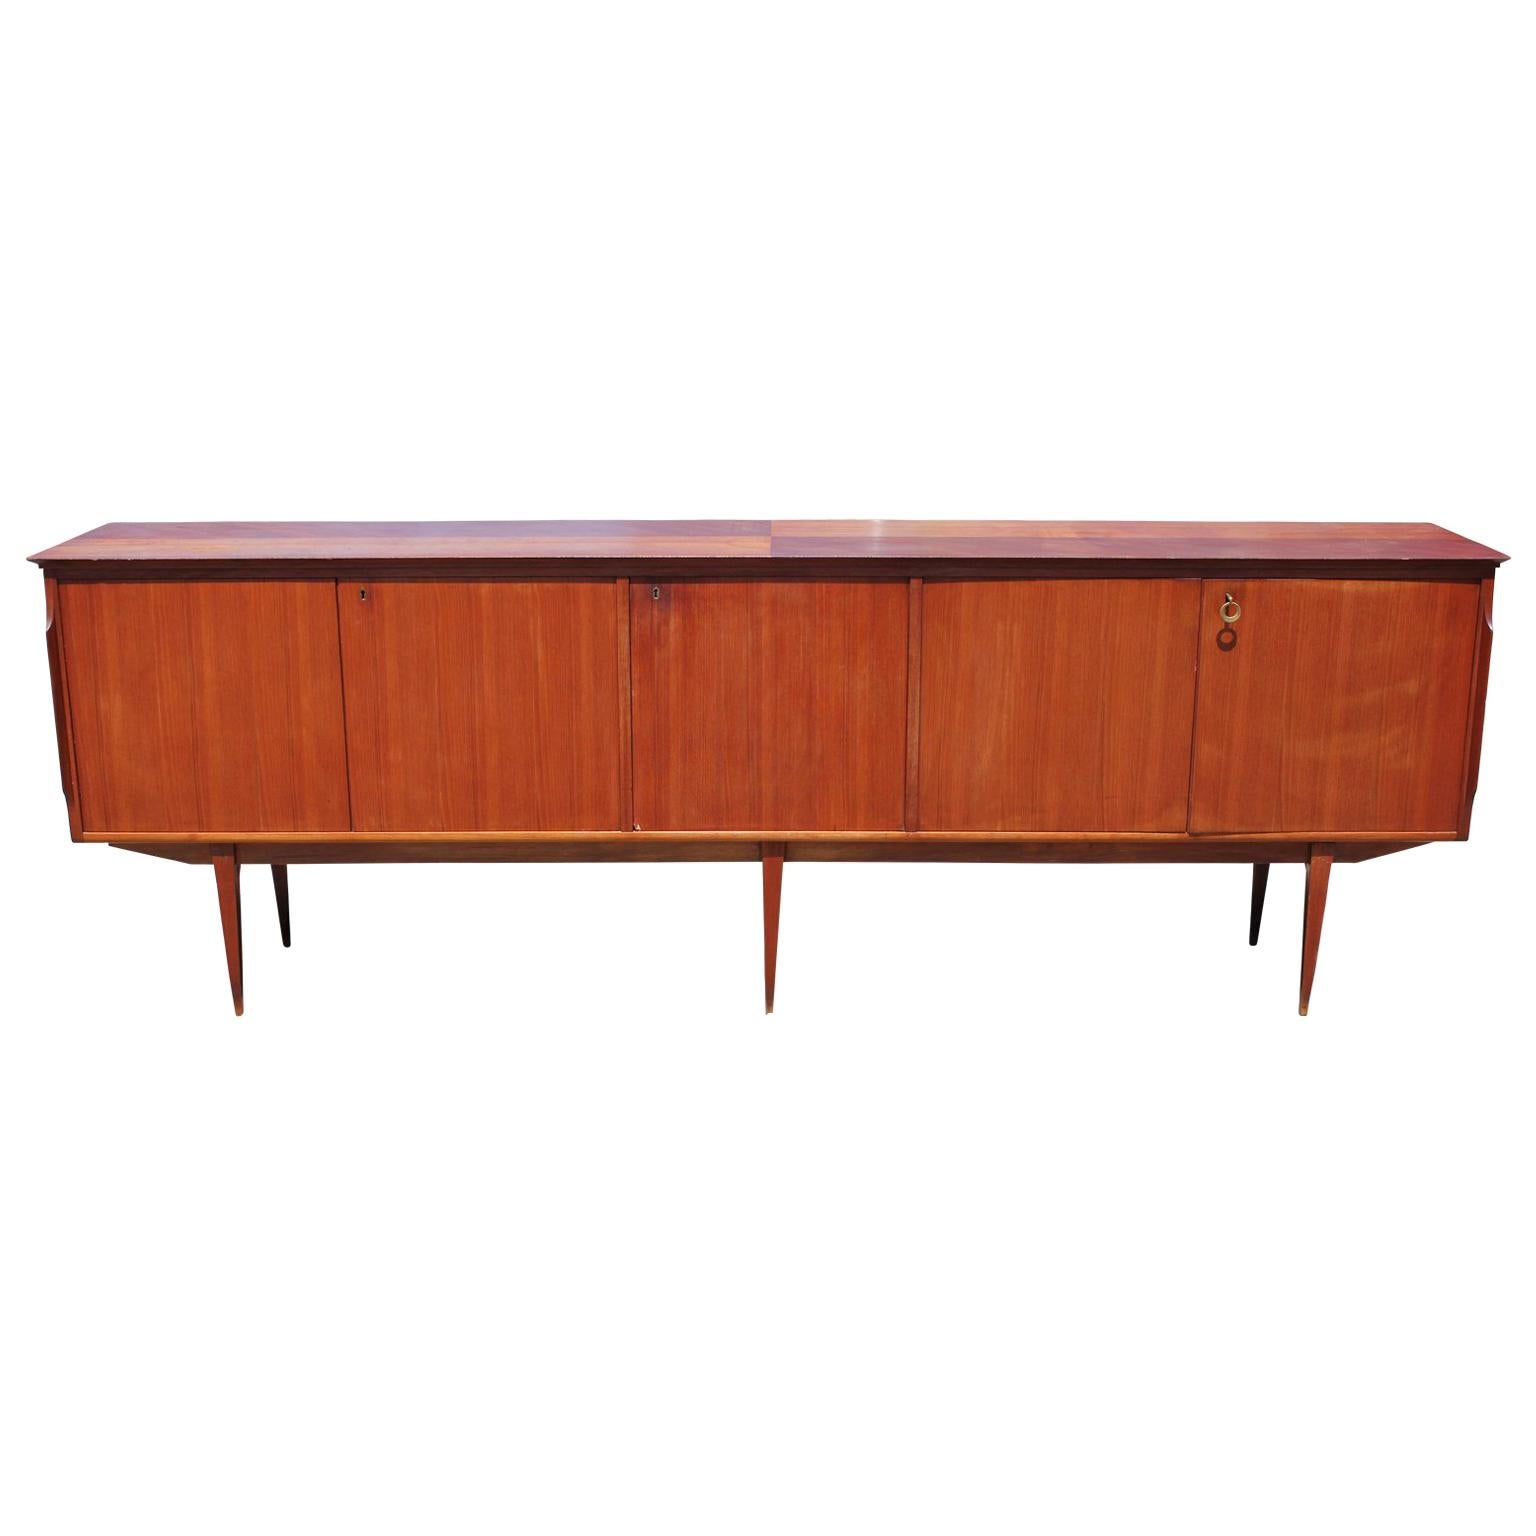 Midcentury Sideboard / Credenza with Hidden Drawers in Style of Kofod Larsen